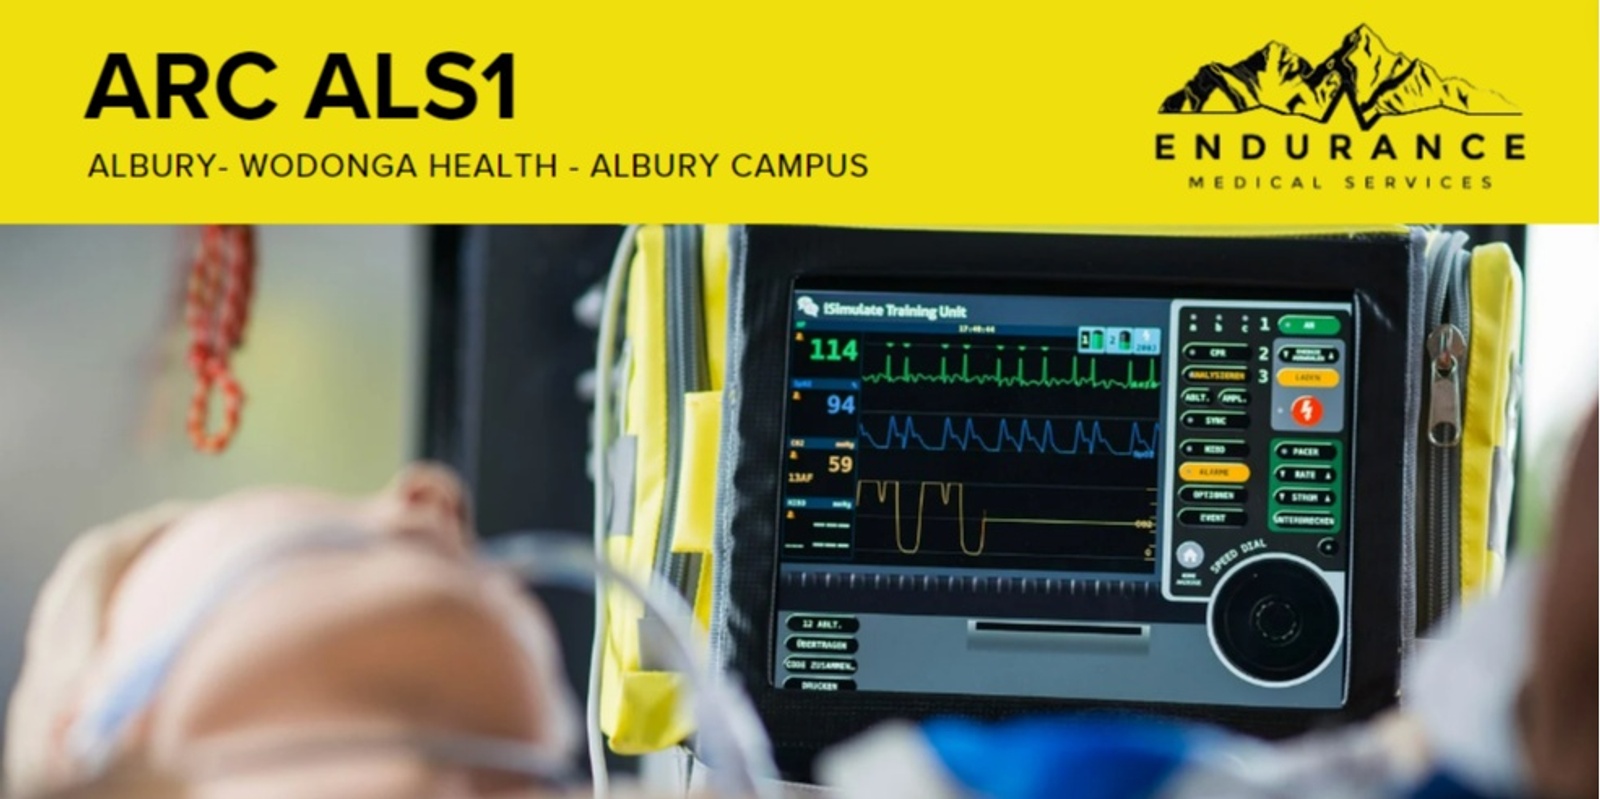 Banner image for ALBURY ARC Advanced Life Support Level 1